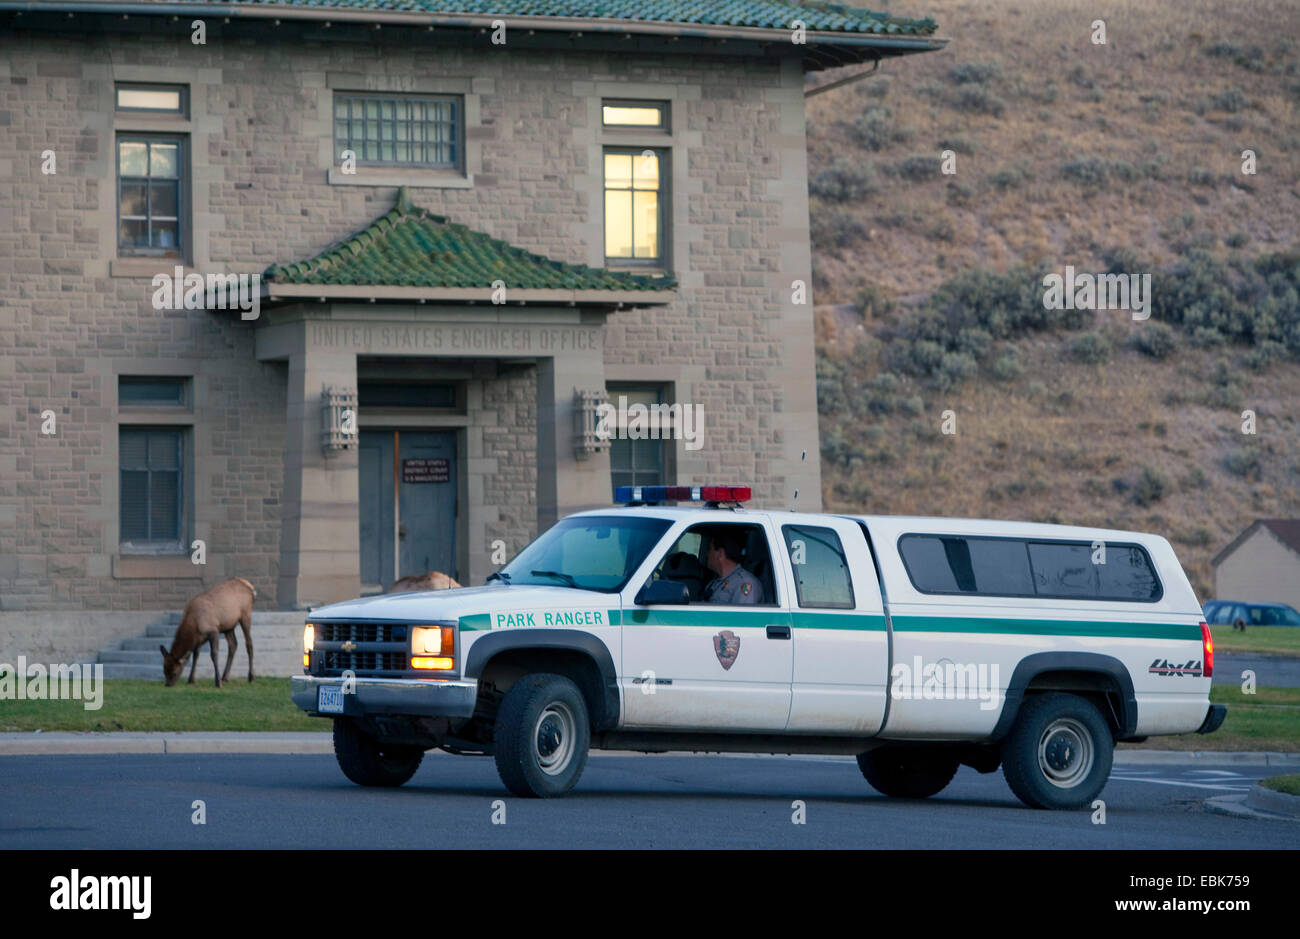 wapiti, elk (Cervus elaphus canadensis, Cervus canadensis), park ranger keeping an eye on elks grazing in fronz of a house, USA, Wyoming, Yellowstone National Park, Mammoth Hot Springs Stock Photo